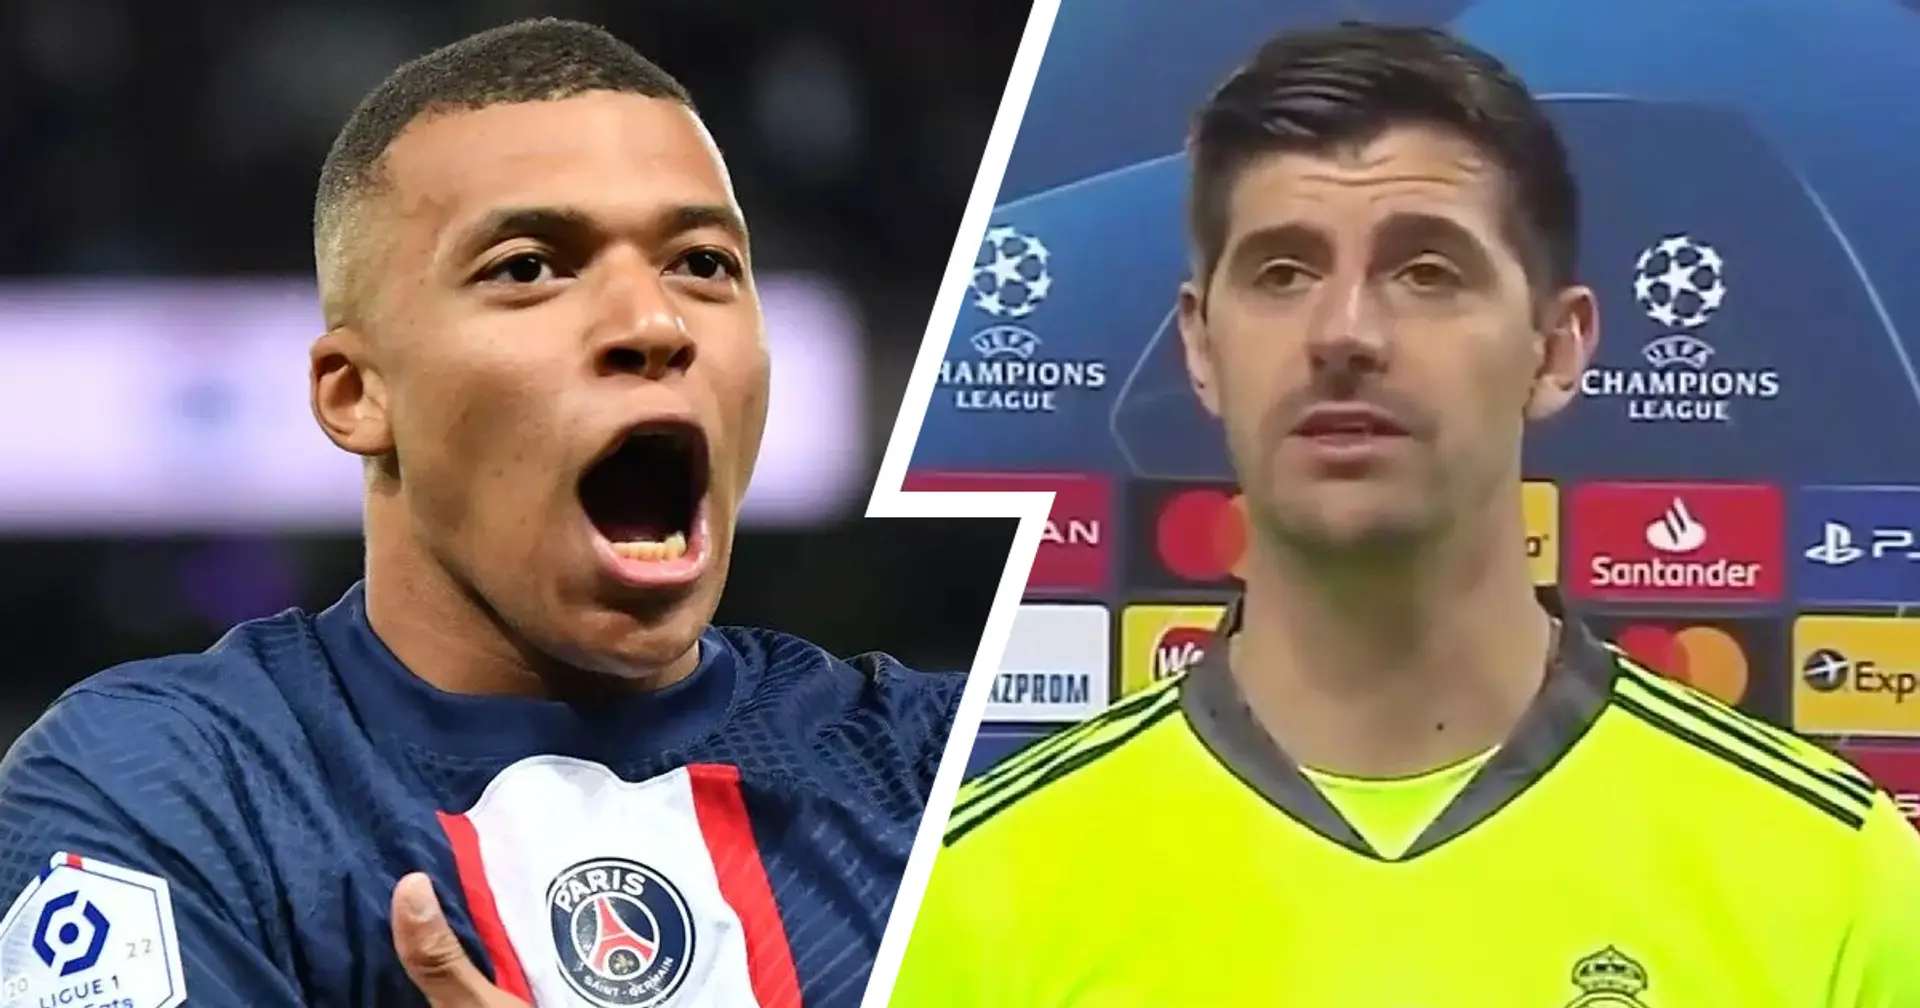 Real Madrid could sign Mbappe in January and 2 more big stories you might've missed